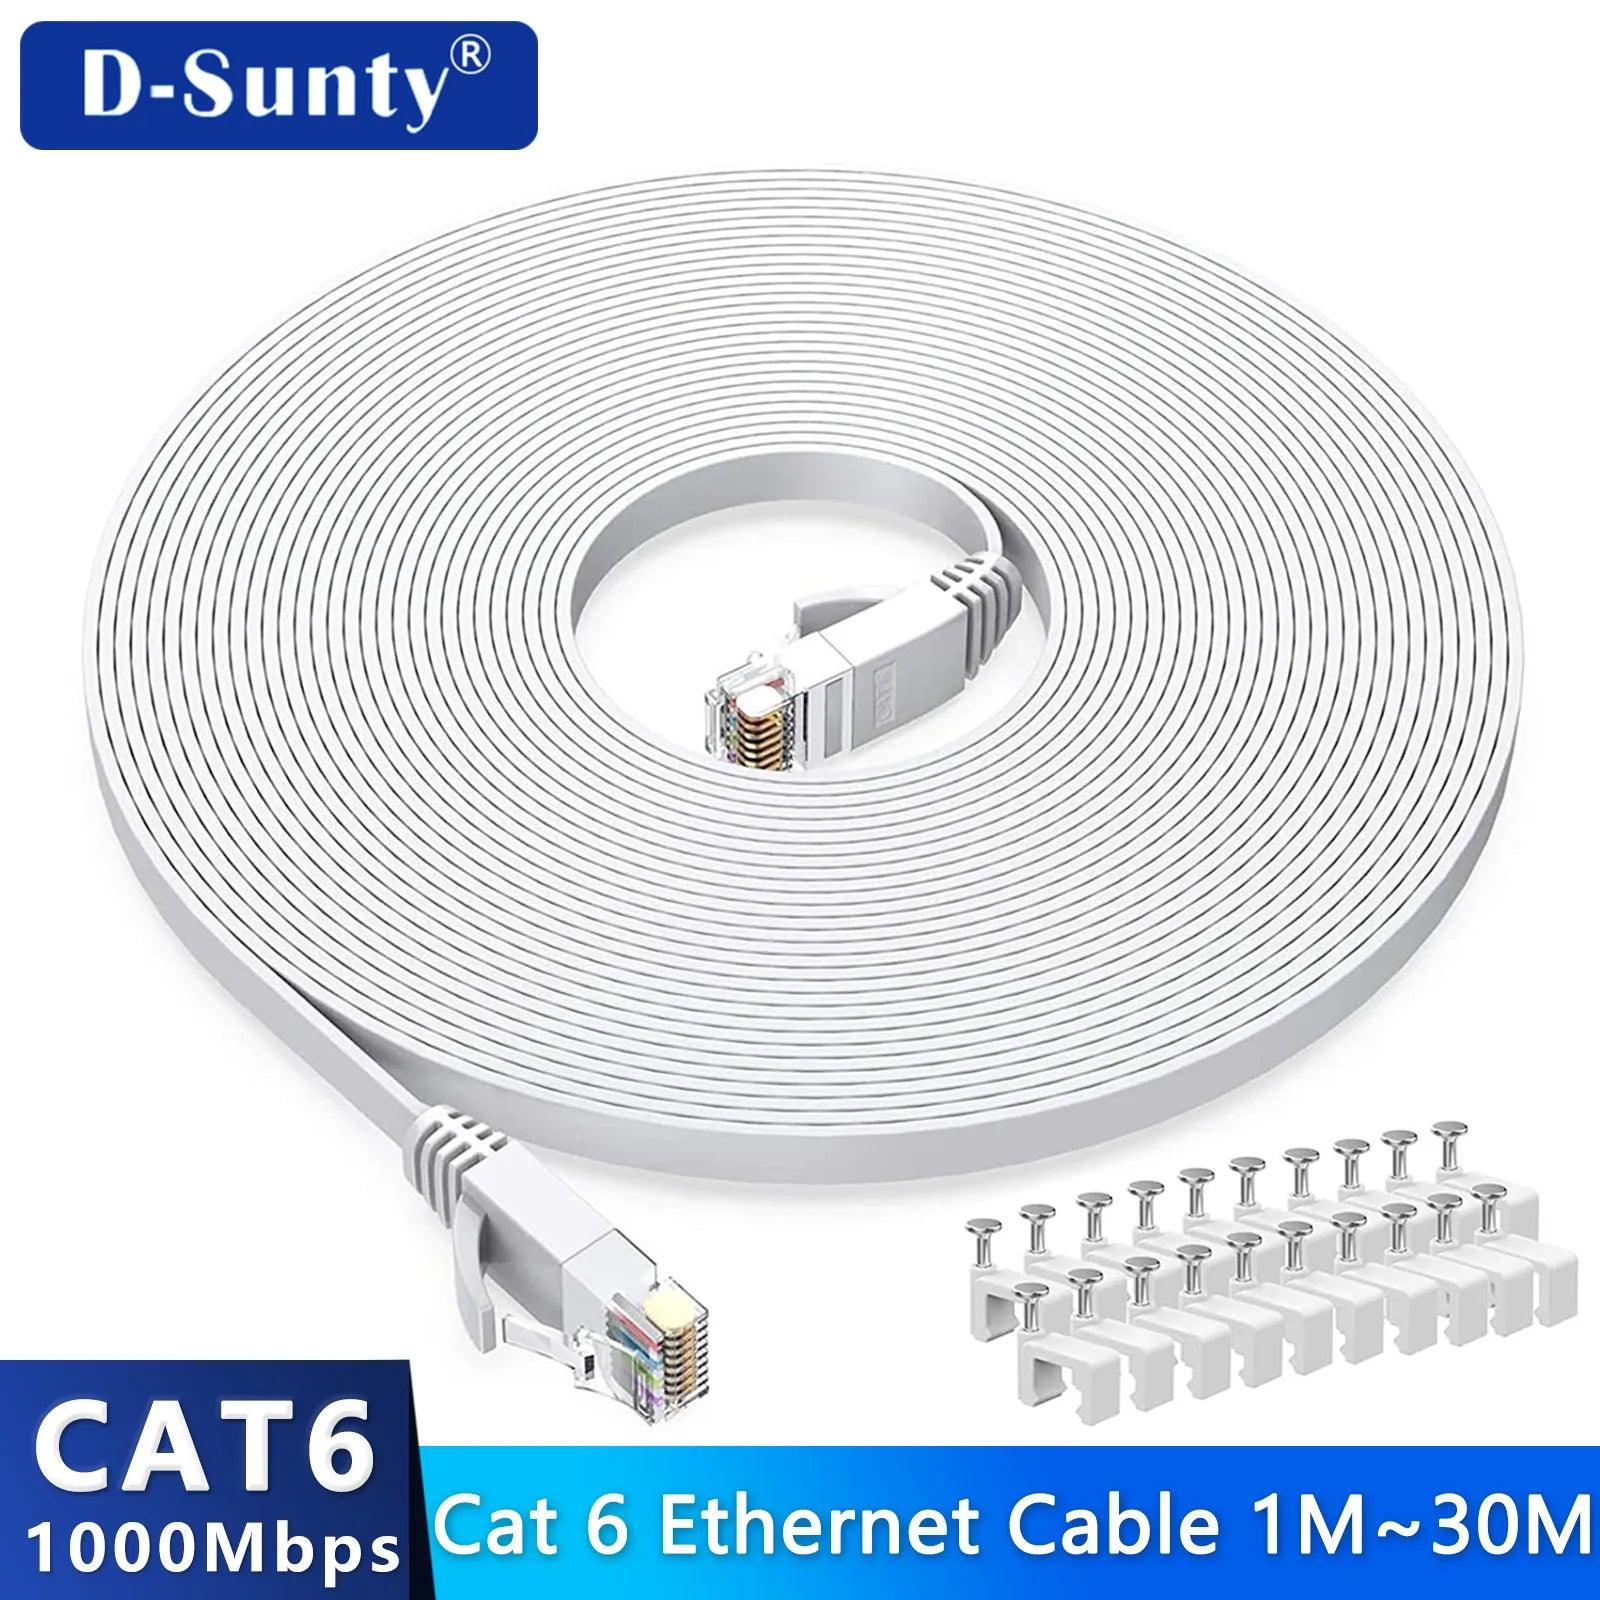 High-Speed Cat6 Ethernet Cable for Seamless Network Connectivity  ourlum.com   